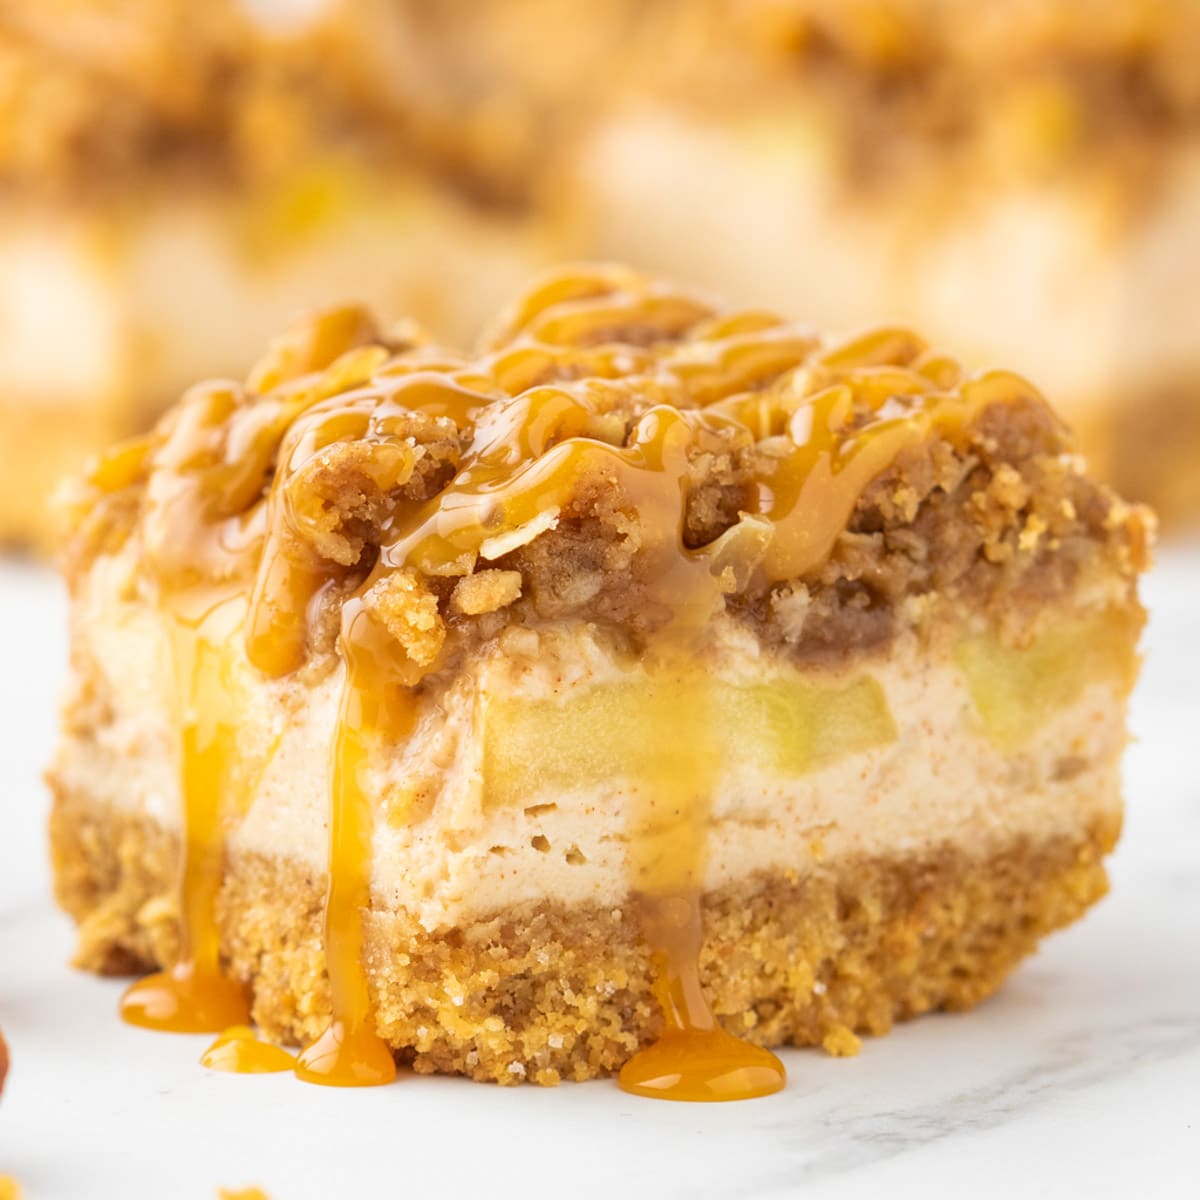 a cheesecake bar with streusel, caramel and apples